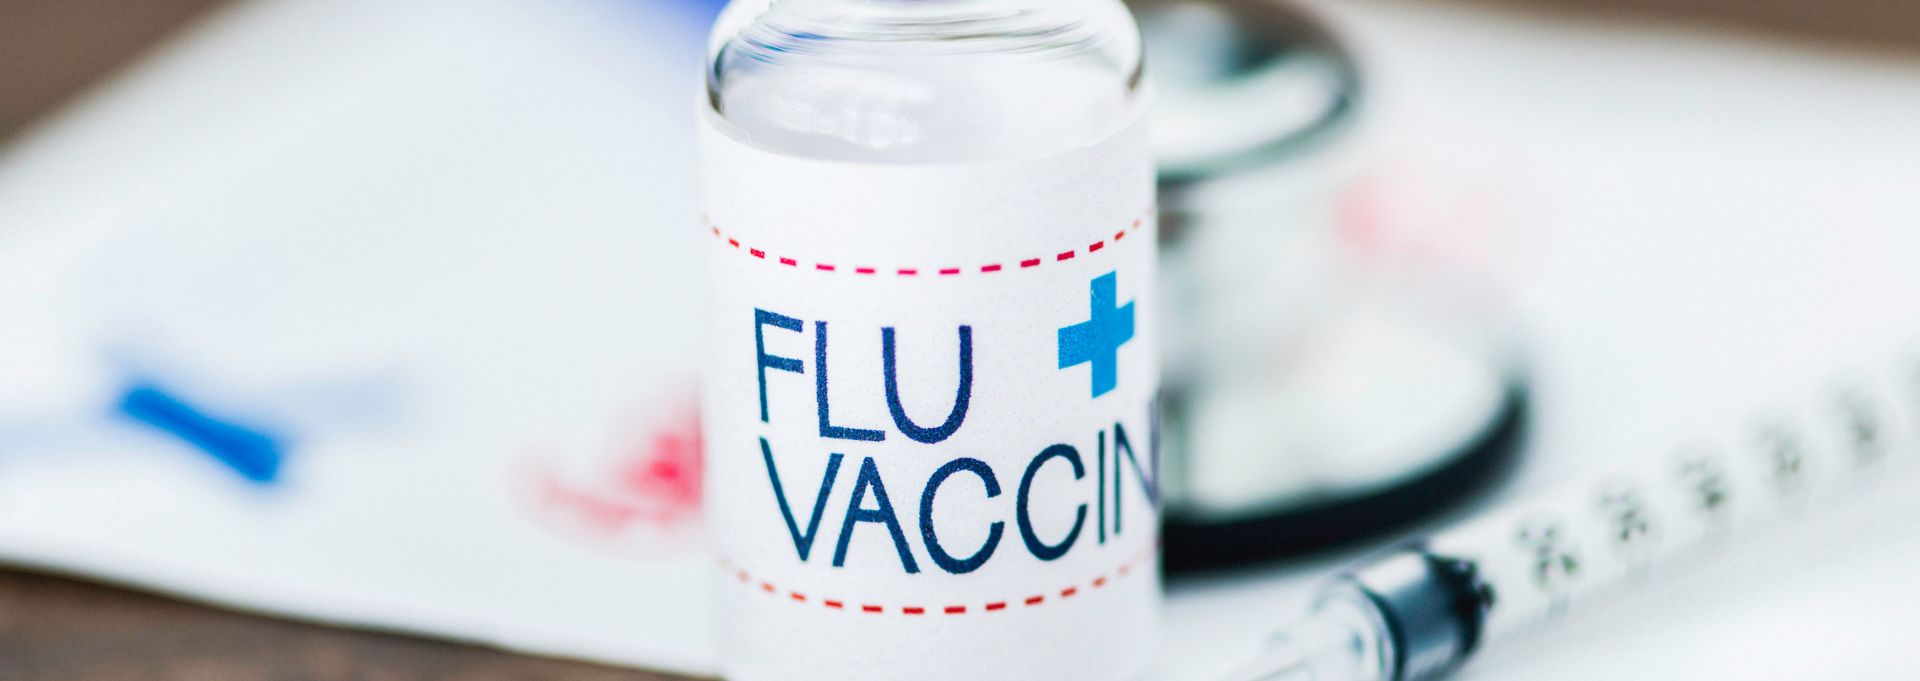 Flu Season is Coming: Why You Should Consider a Flu Vaccine